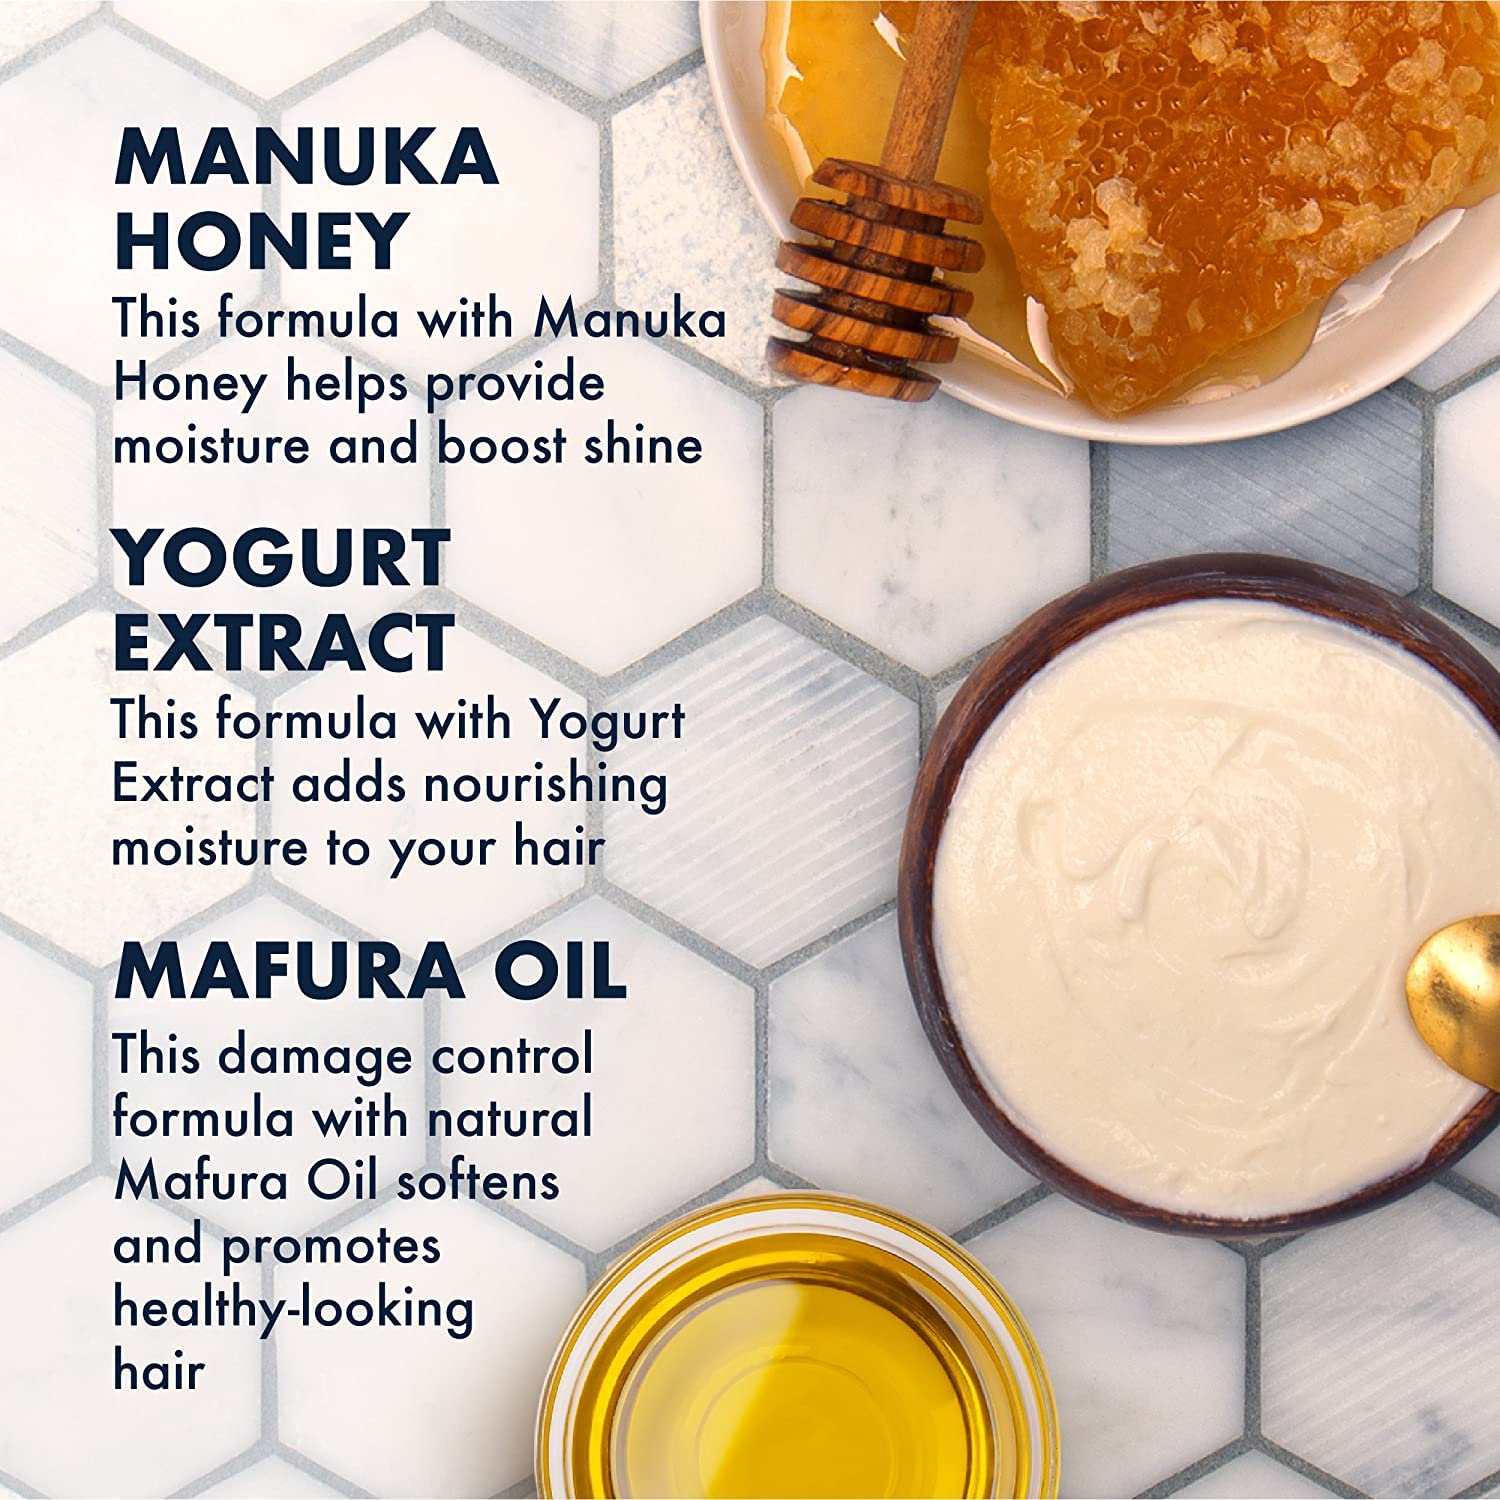 Shea Moisture Manuka Honey & Yogurt Hydrate + Repair Combo Kit, Multi-Action Leave-In Conditioning Spray Bundled with Protein-Strong Treatment, Deep Conditioning for Hair, 8 oz ea.